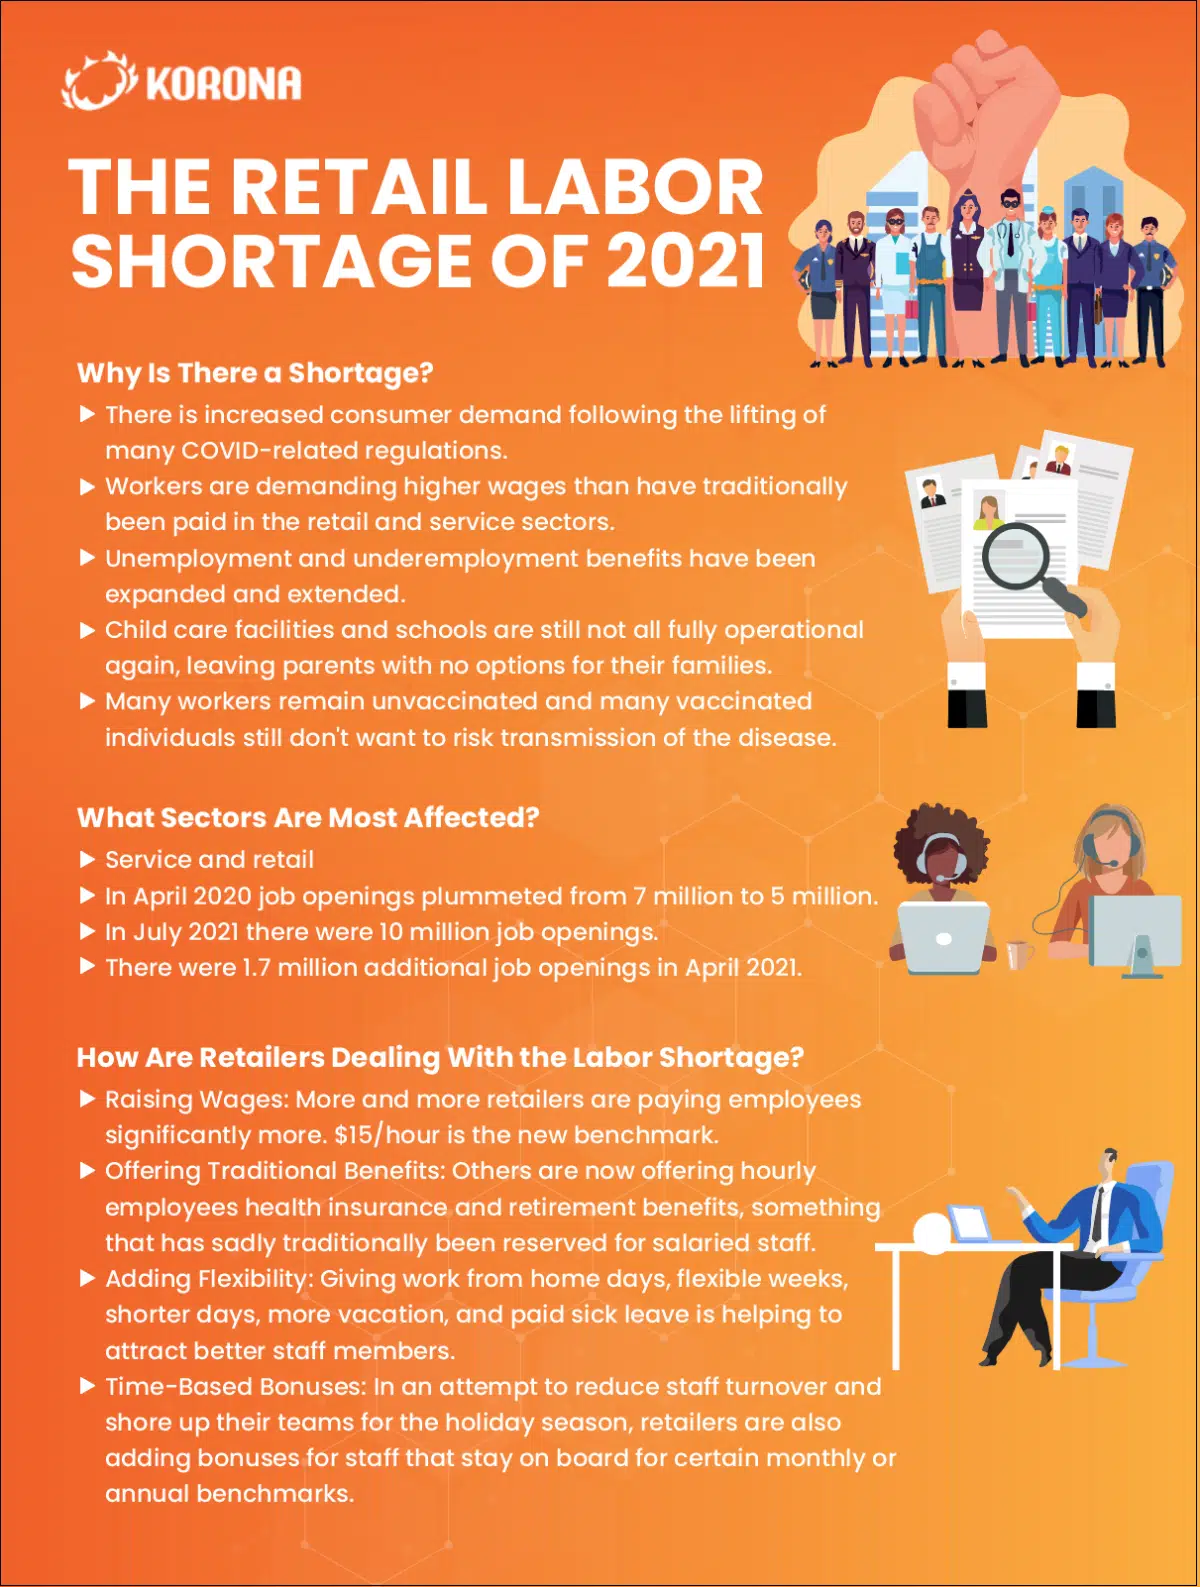 an infographic on the retail labor shortage of 2021